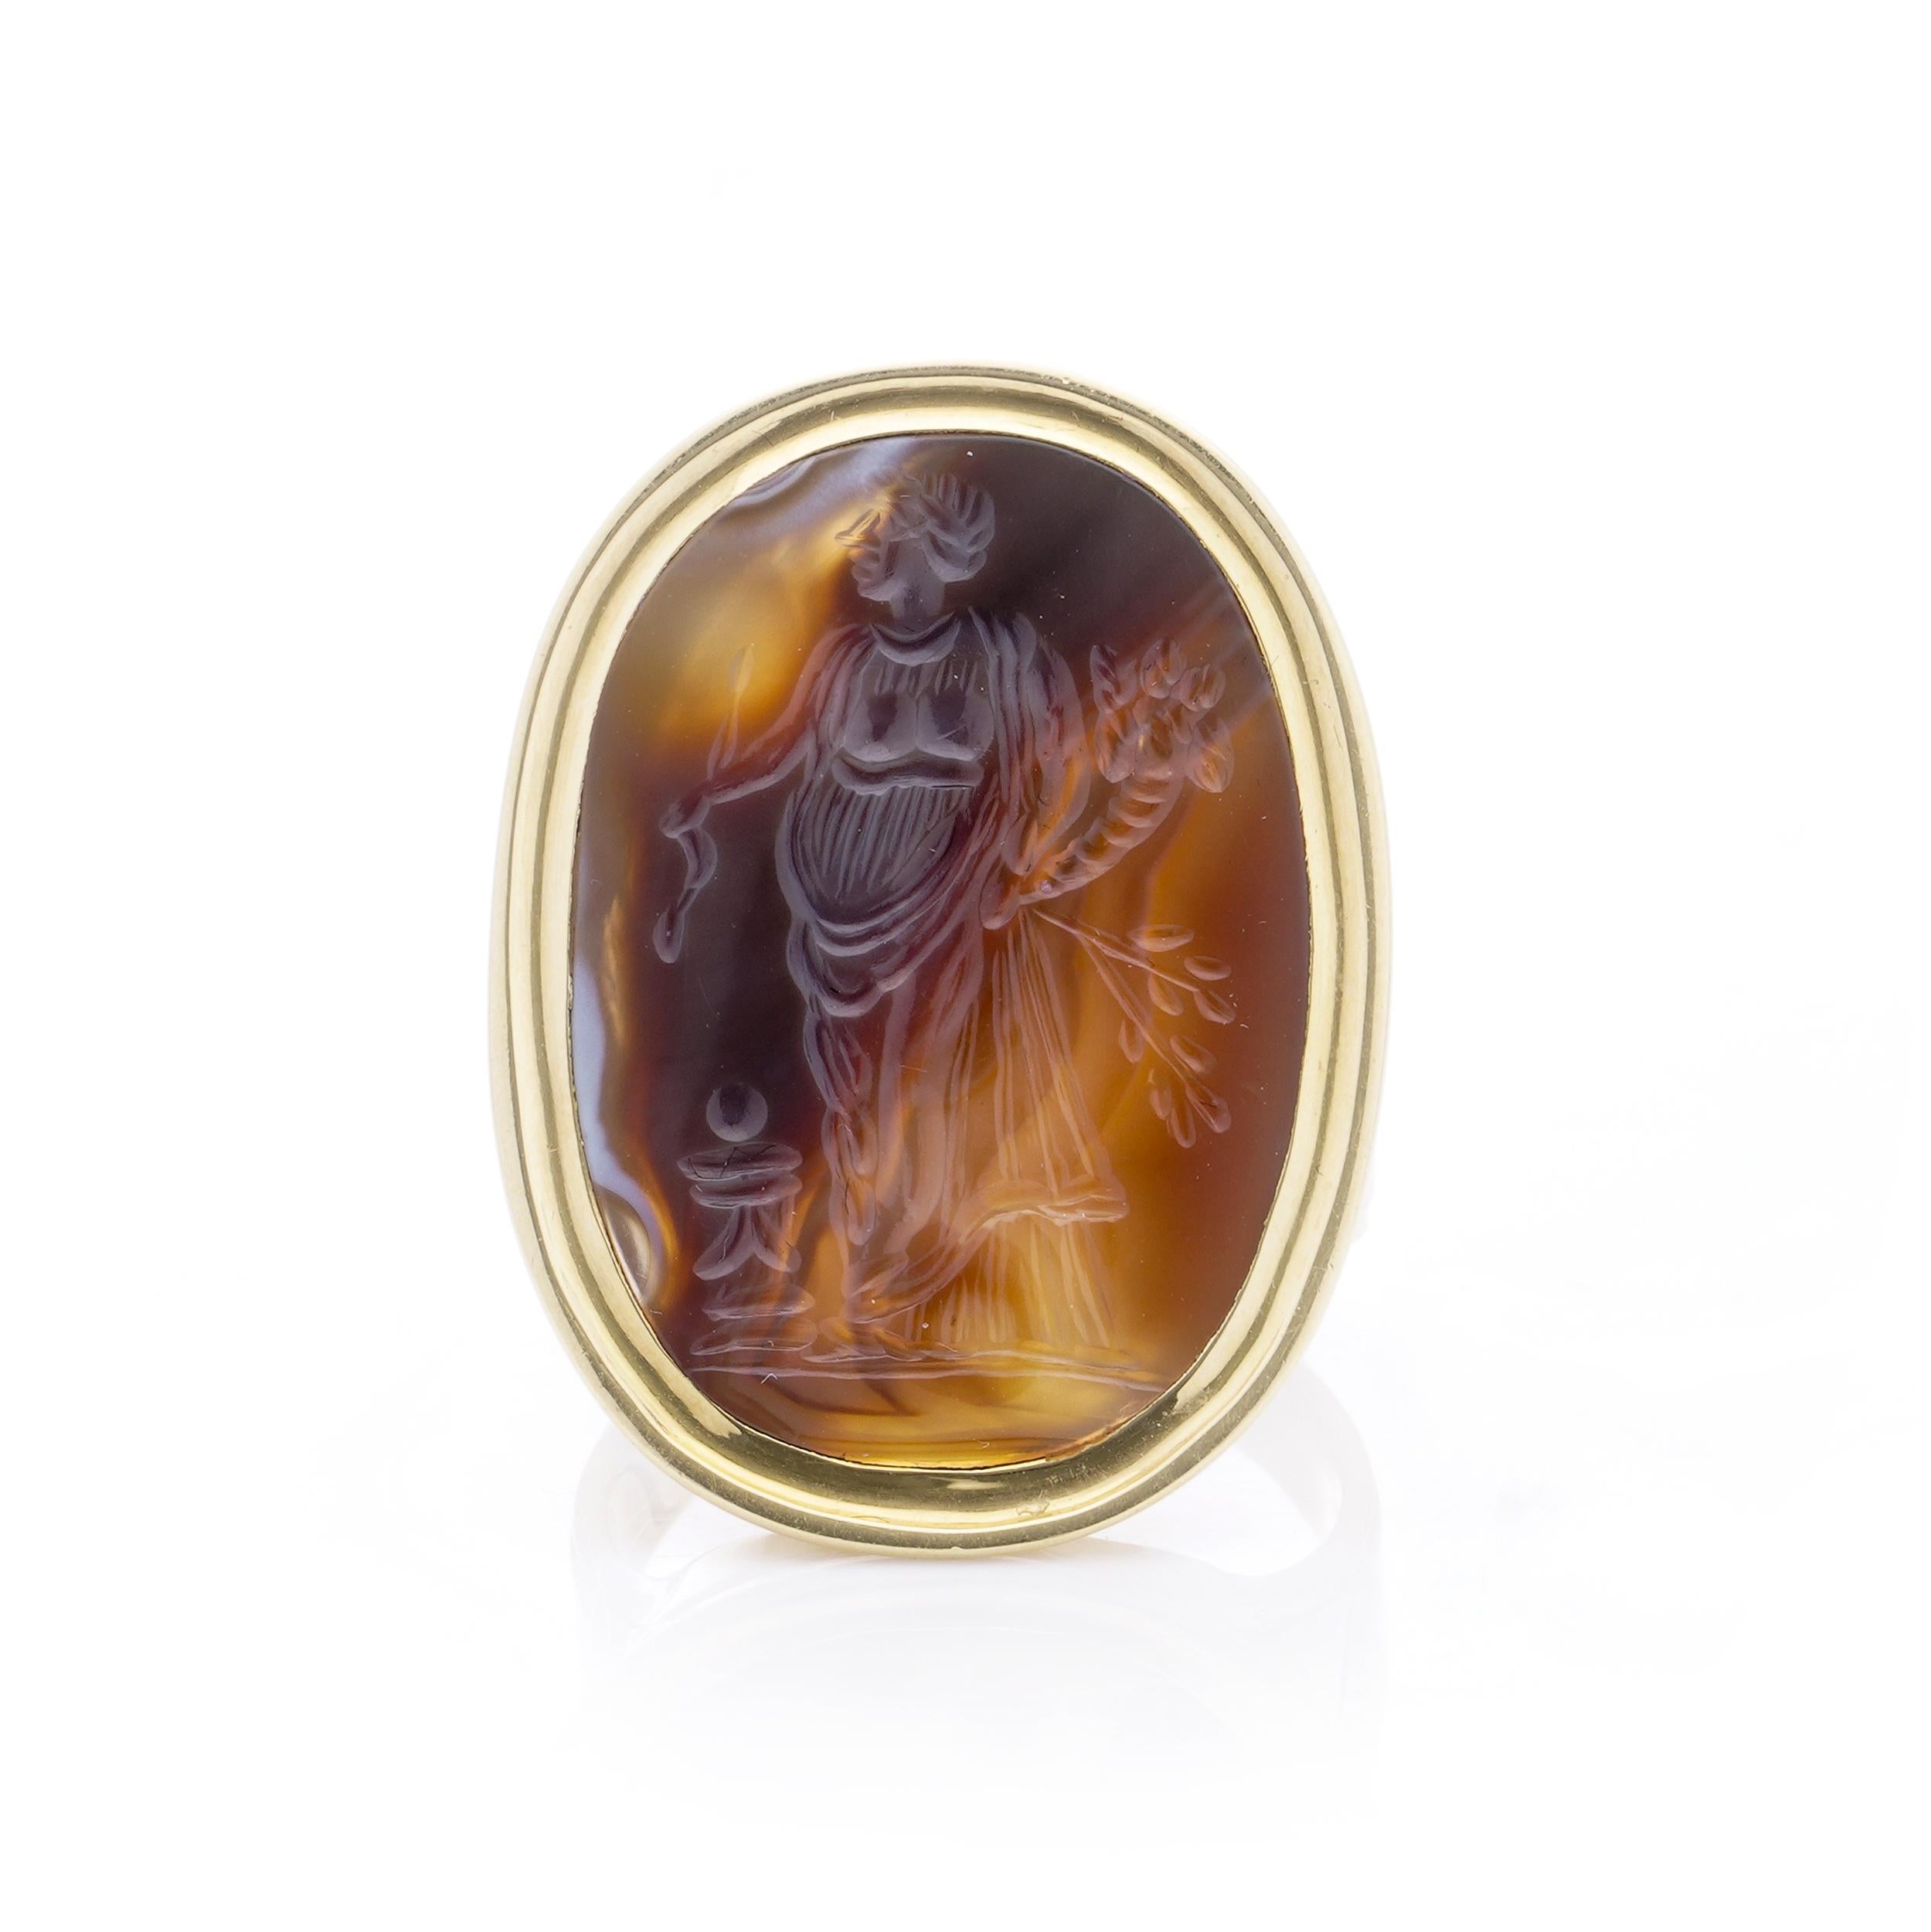 Antique 19th century 18kt. yellow gold banded agate intaglio signet ring featuring Ceres, a goddess of agriculture, grain and crops. 

Made in the late 19th century. 
X - X-ray has been tested for 18kt. gold. 

The dimensions - 
Ring Size: Length x